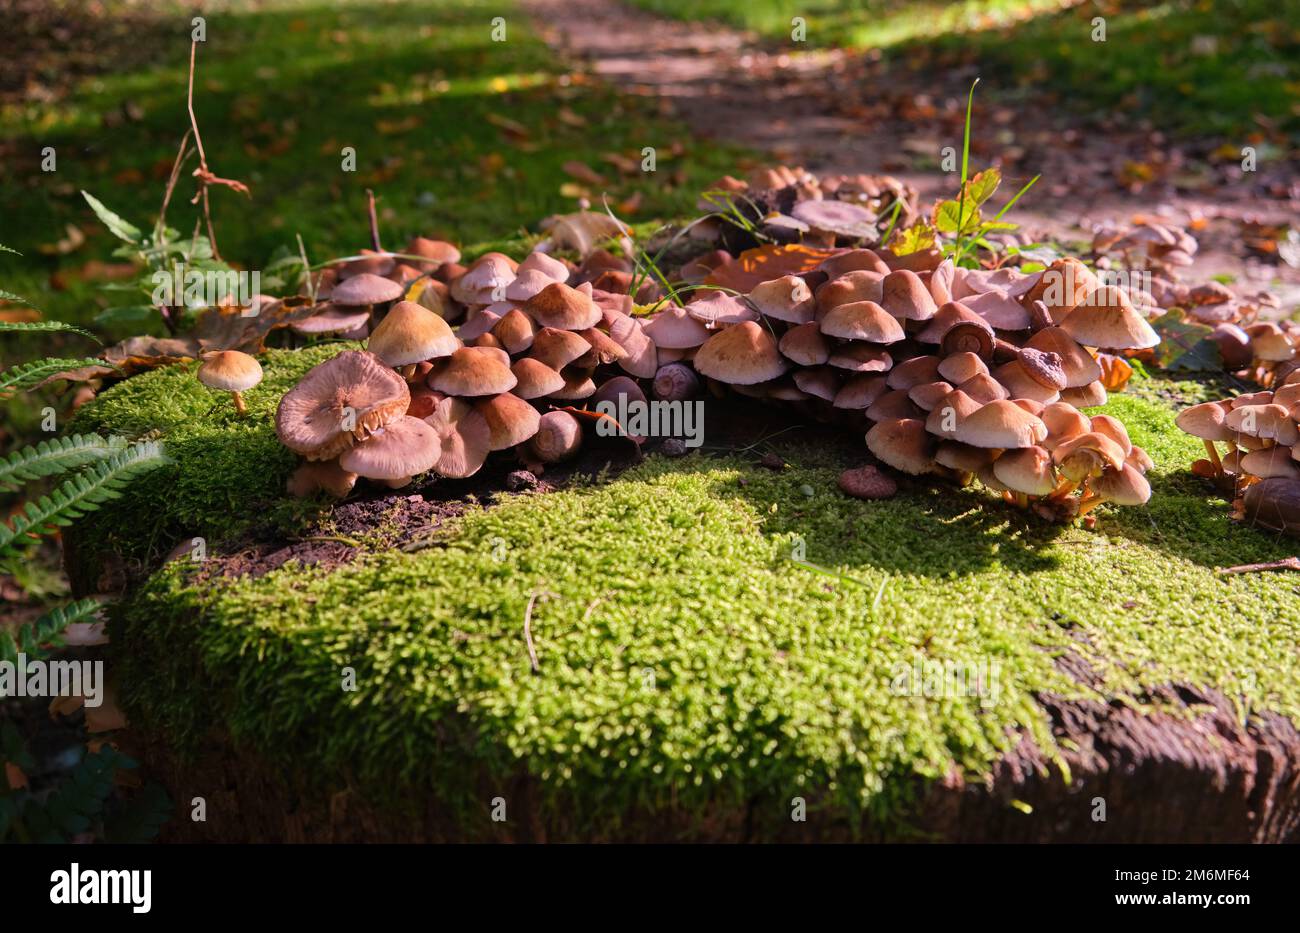 Close-Up growing Mushrooms Growing On Log wild in a forest Stock Photo